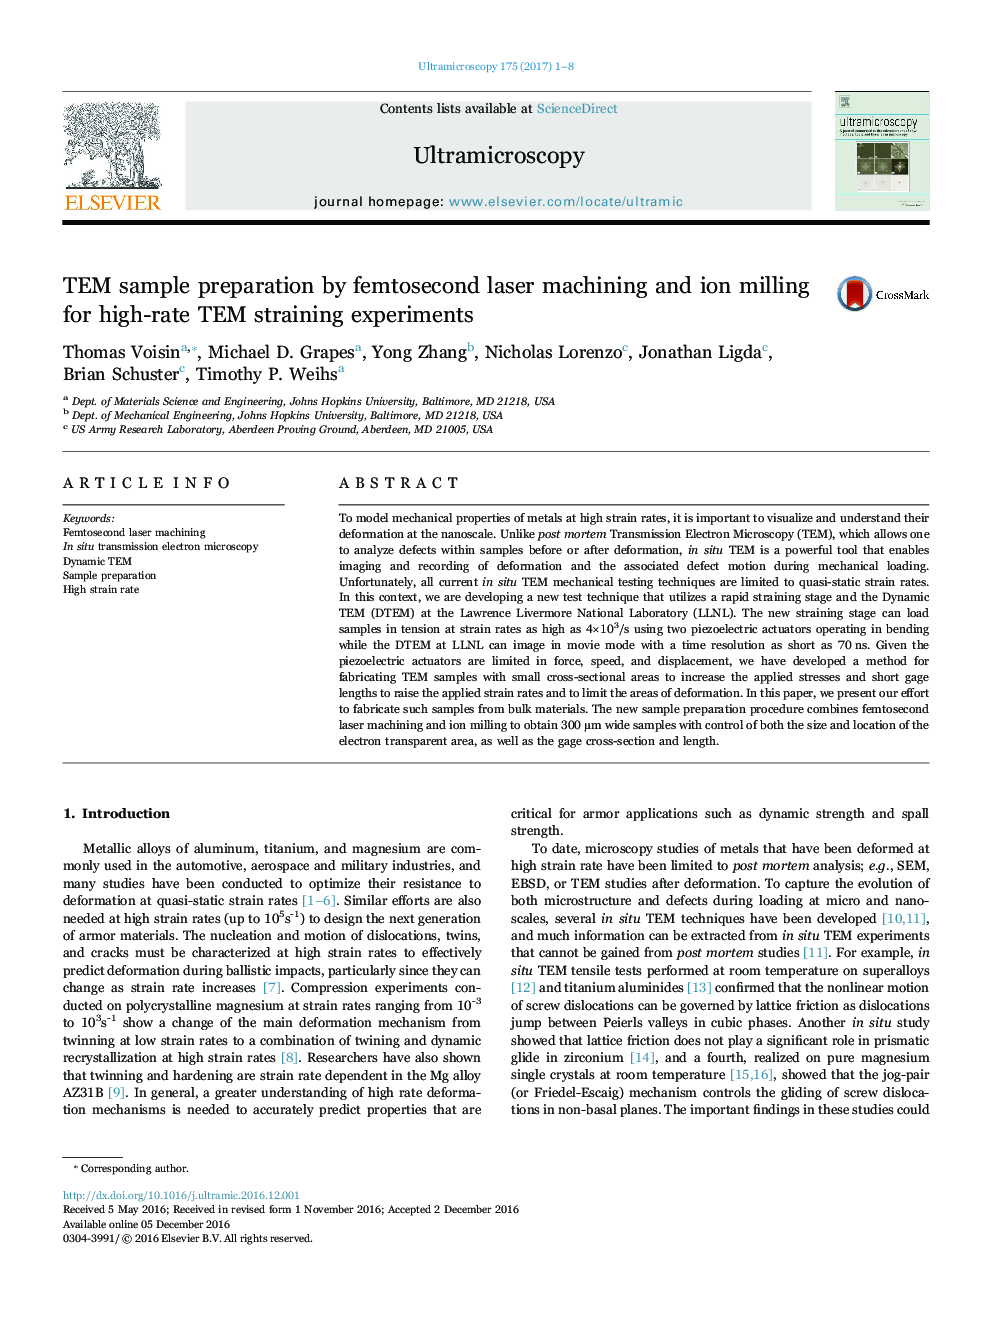 TEM sample preparation by femtosecond laser machining and ion milling for high-rate TEM straining experiments